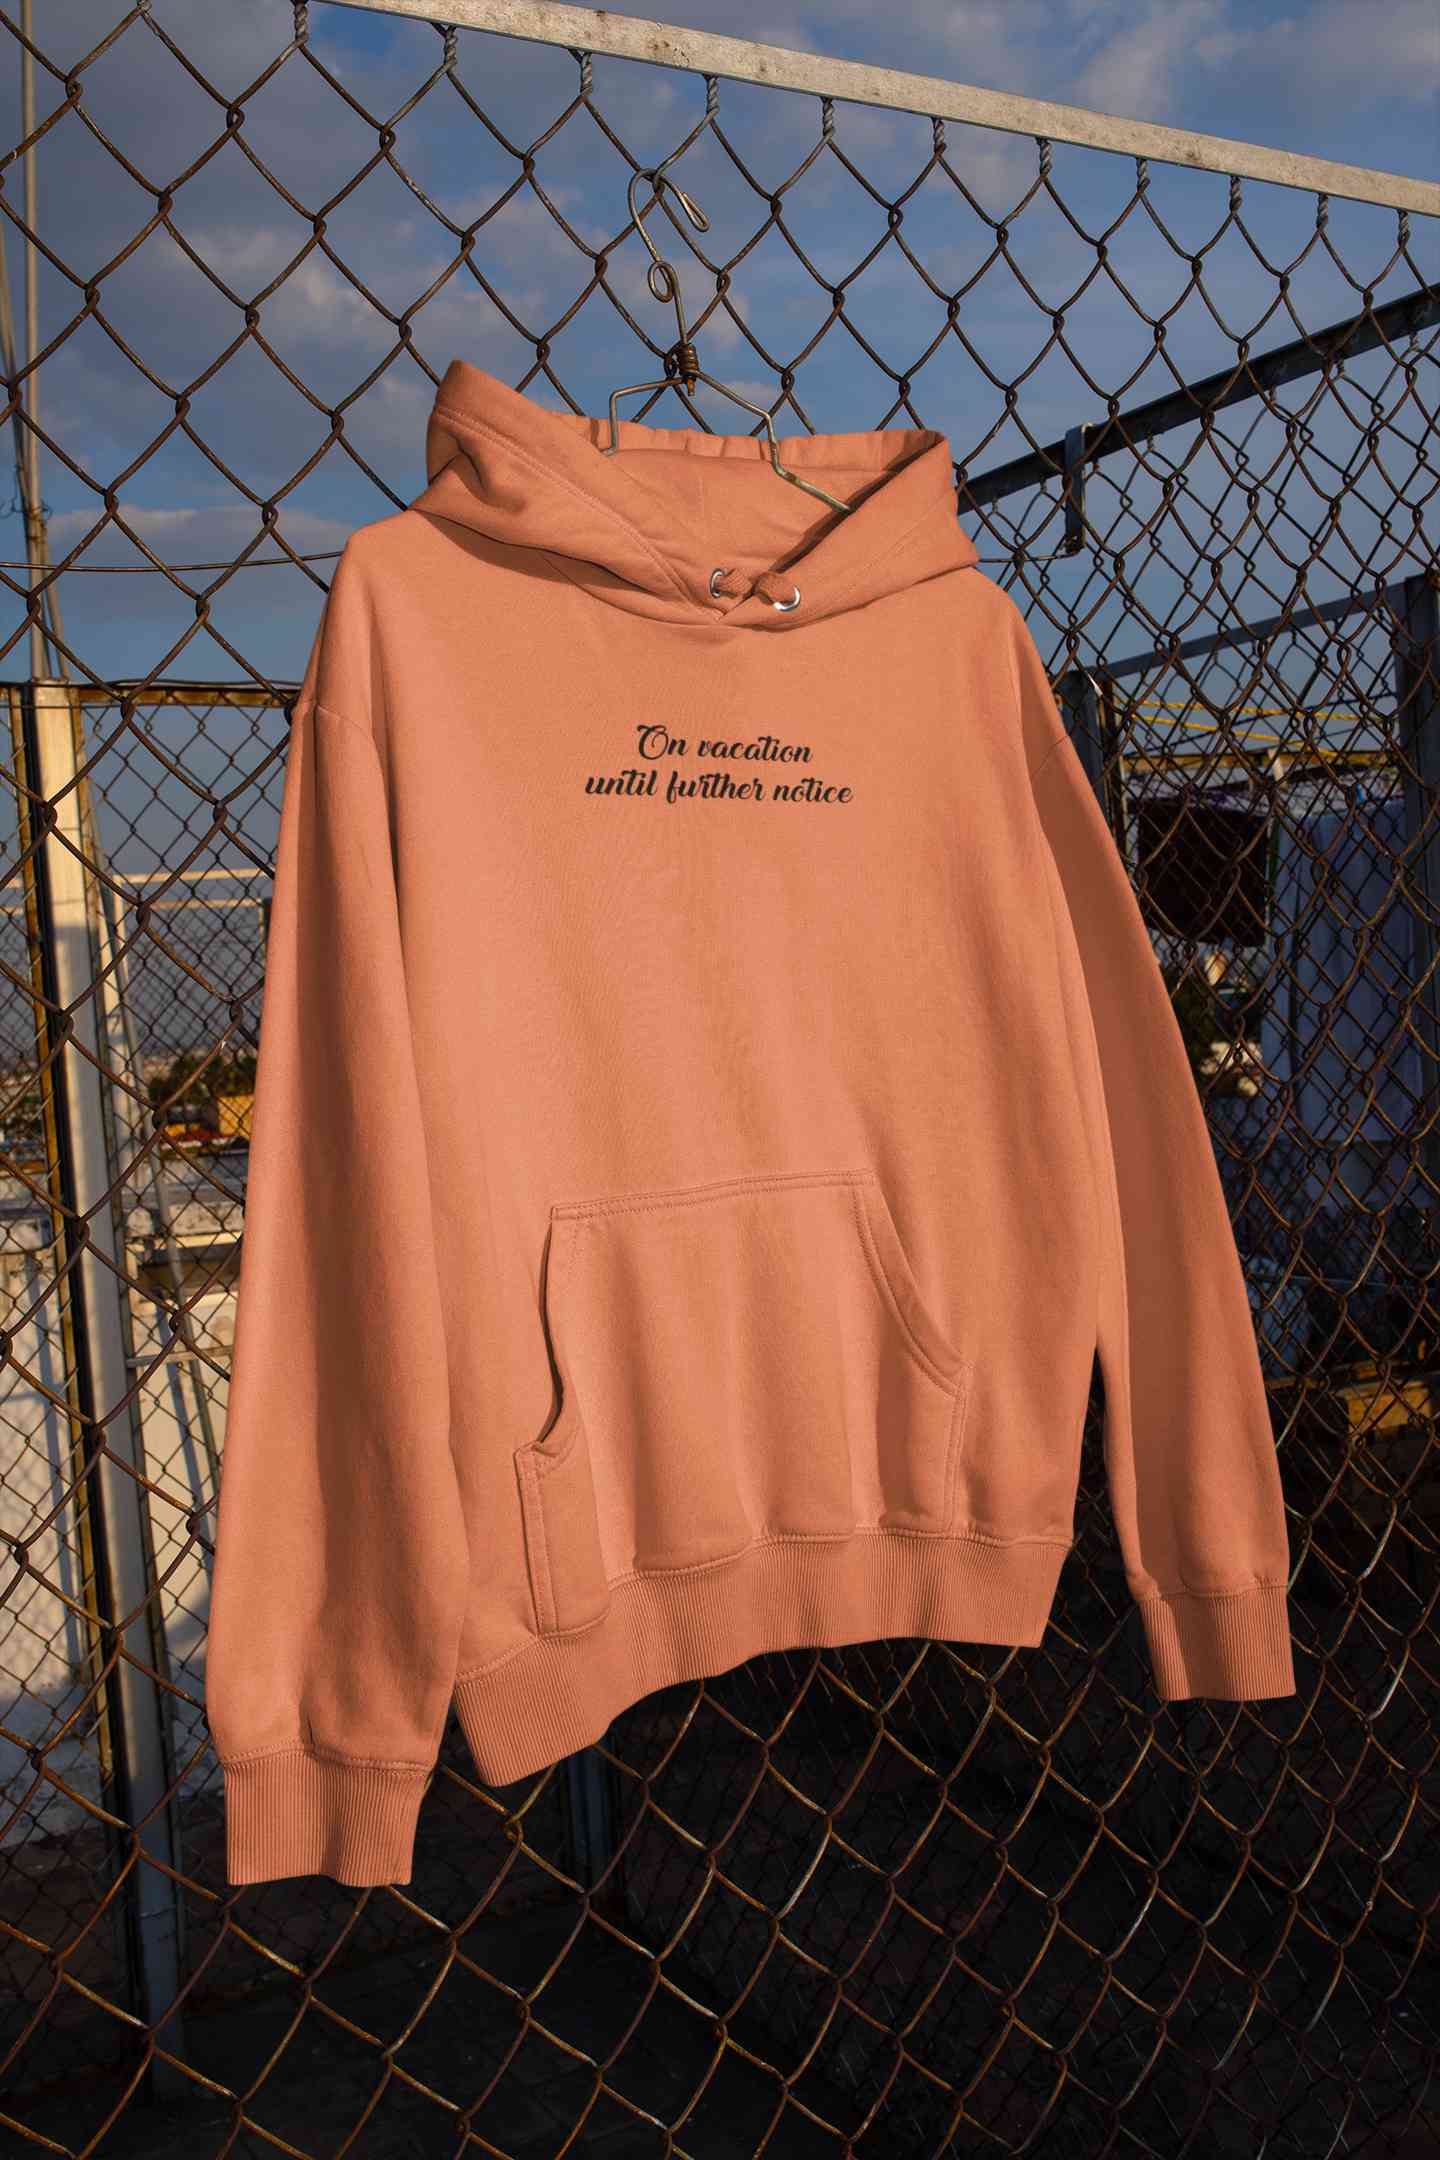 On Vacation Until Further Notice Hoodies for Women-FunkyTeesClub